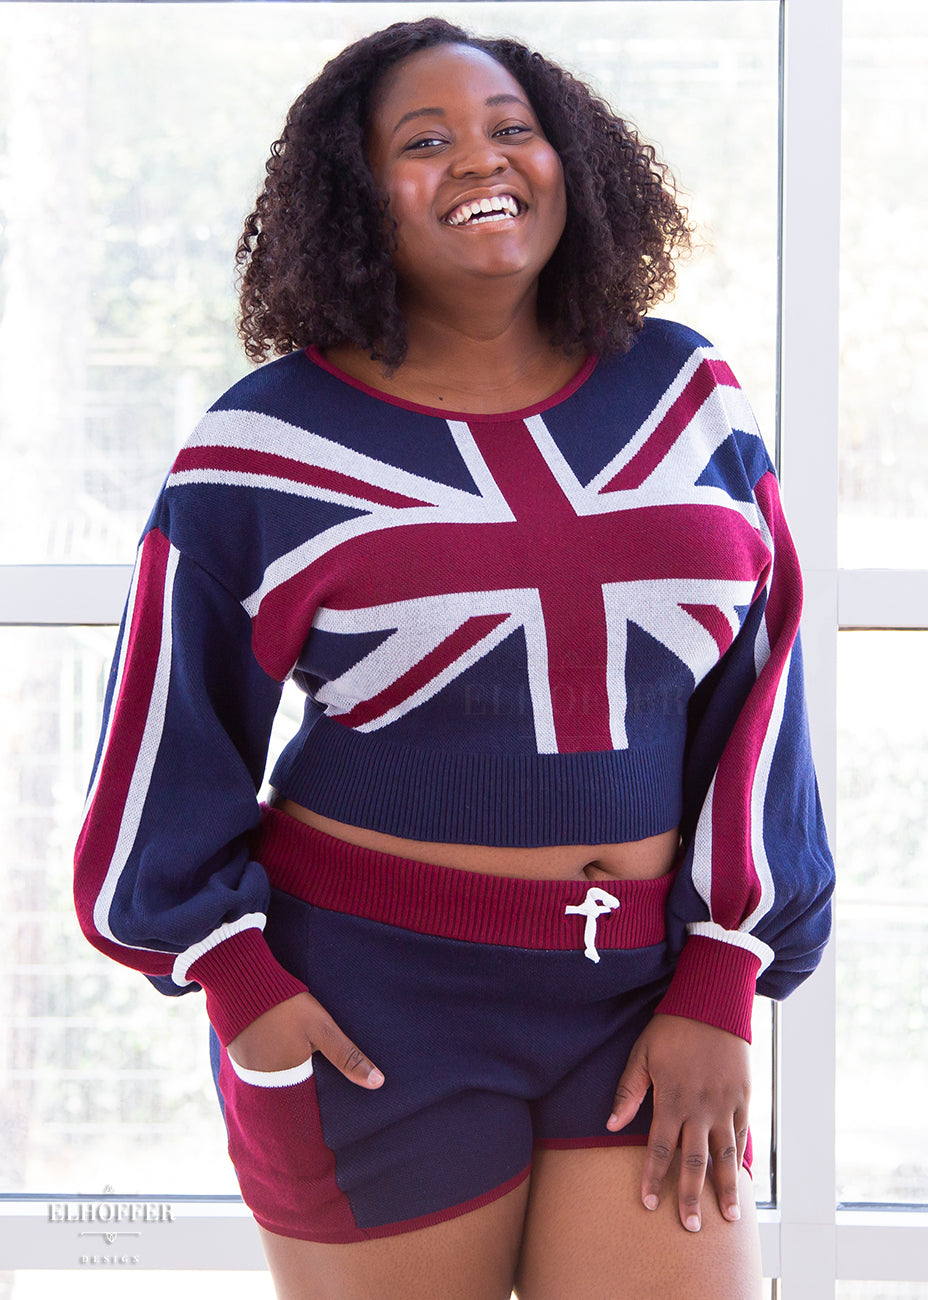 Maydelle, a medium dark skinned XL model with short curly brown hair, is wearing the red, white and blue knit oversized crop top with bishop sleeves. The top has a union jack across the chest and continuing into the sleeves. The cuffs are red with a white detail. There is also a red detail at the neckline.